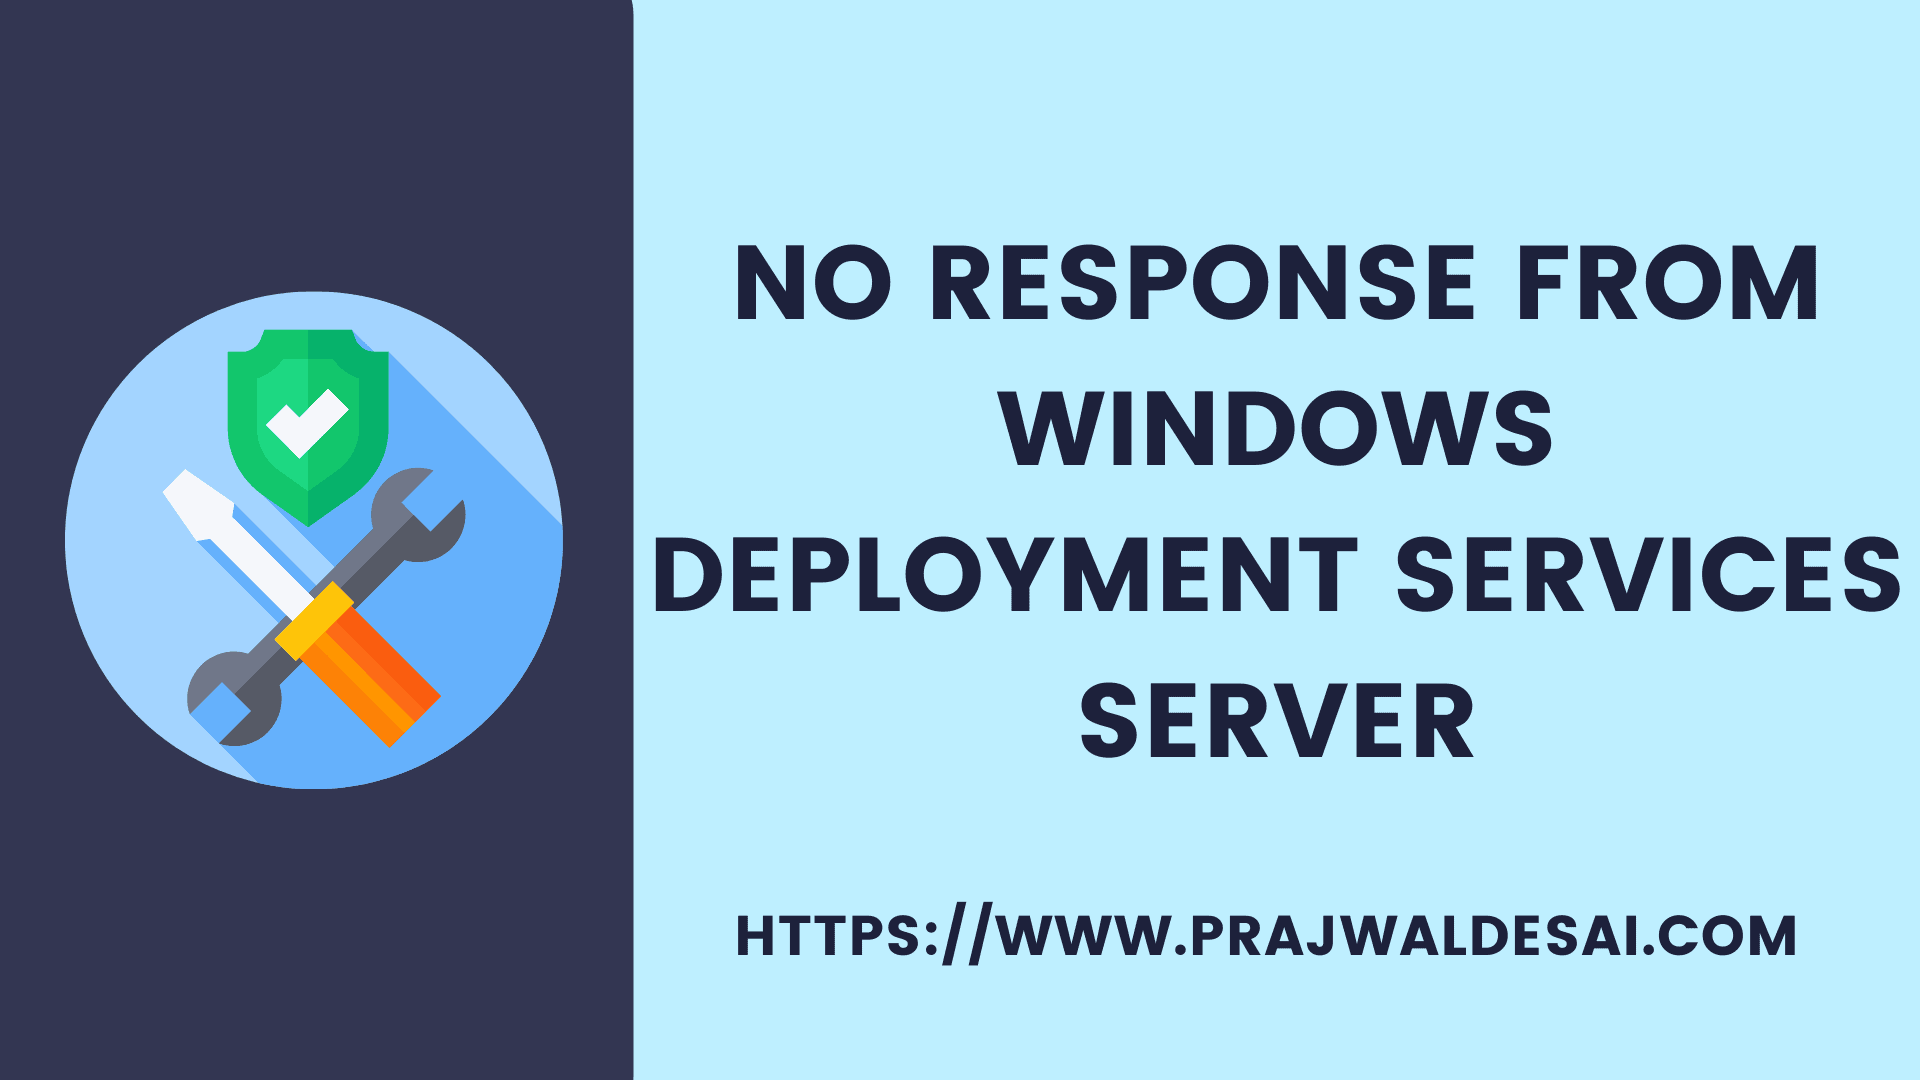 No Response from Windows Deployment Services Server